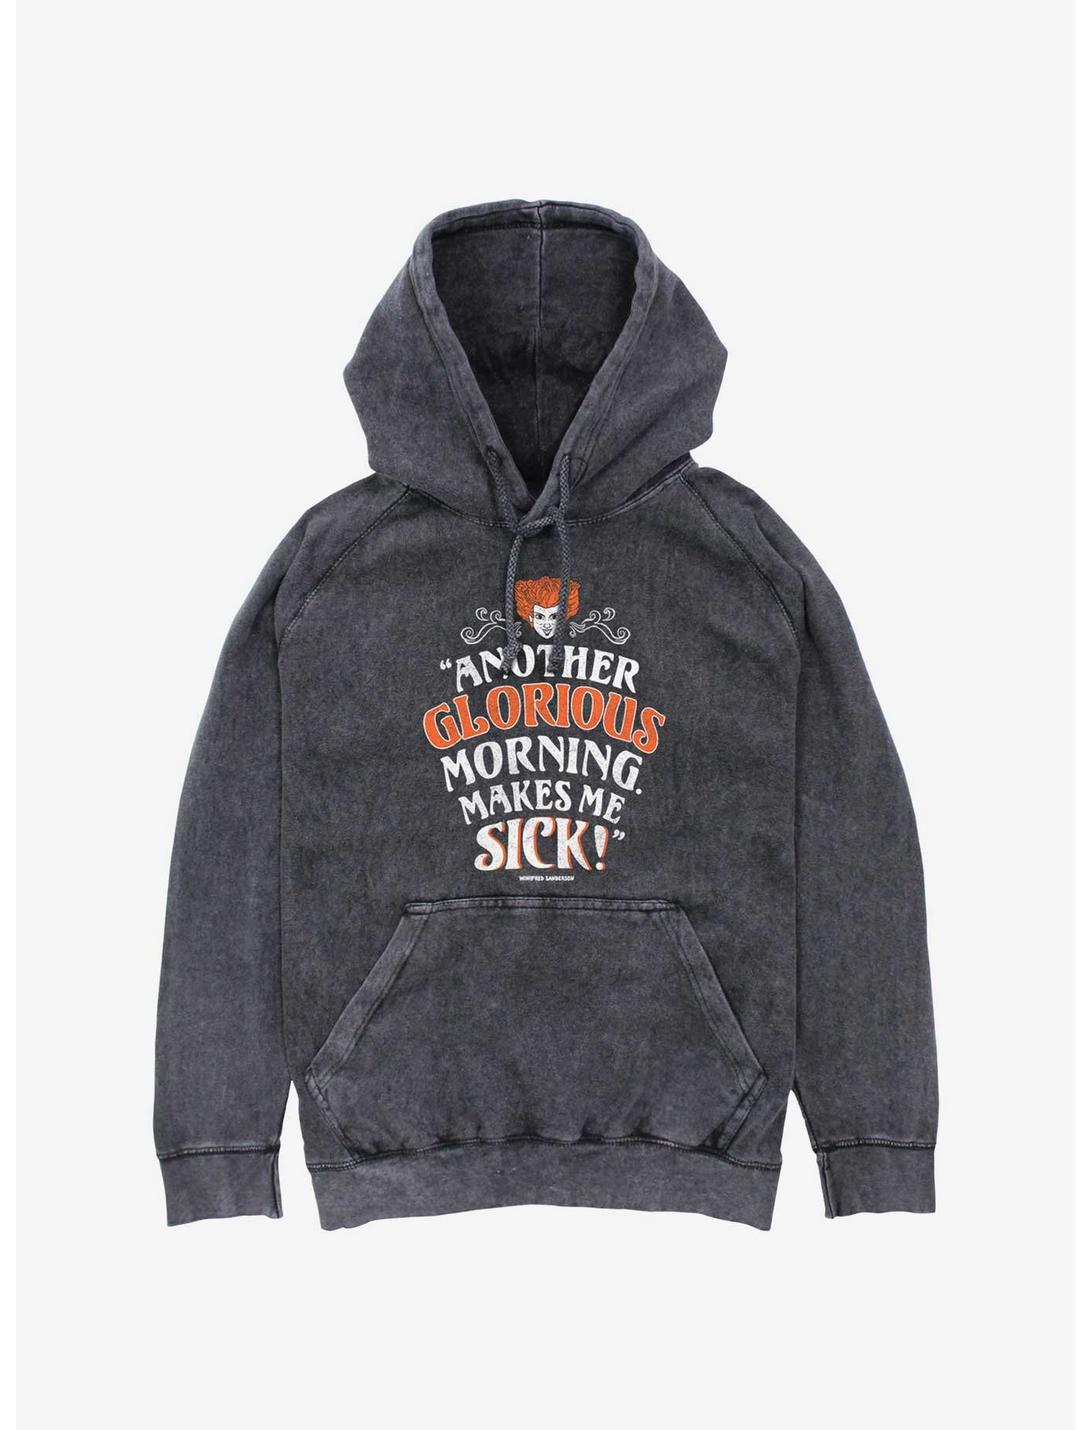 Disney Hocus Pocus Another Glorious Morning Mineral Wash Hoodie, BLACK, hi-res